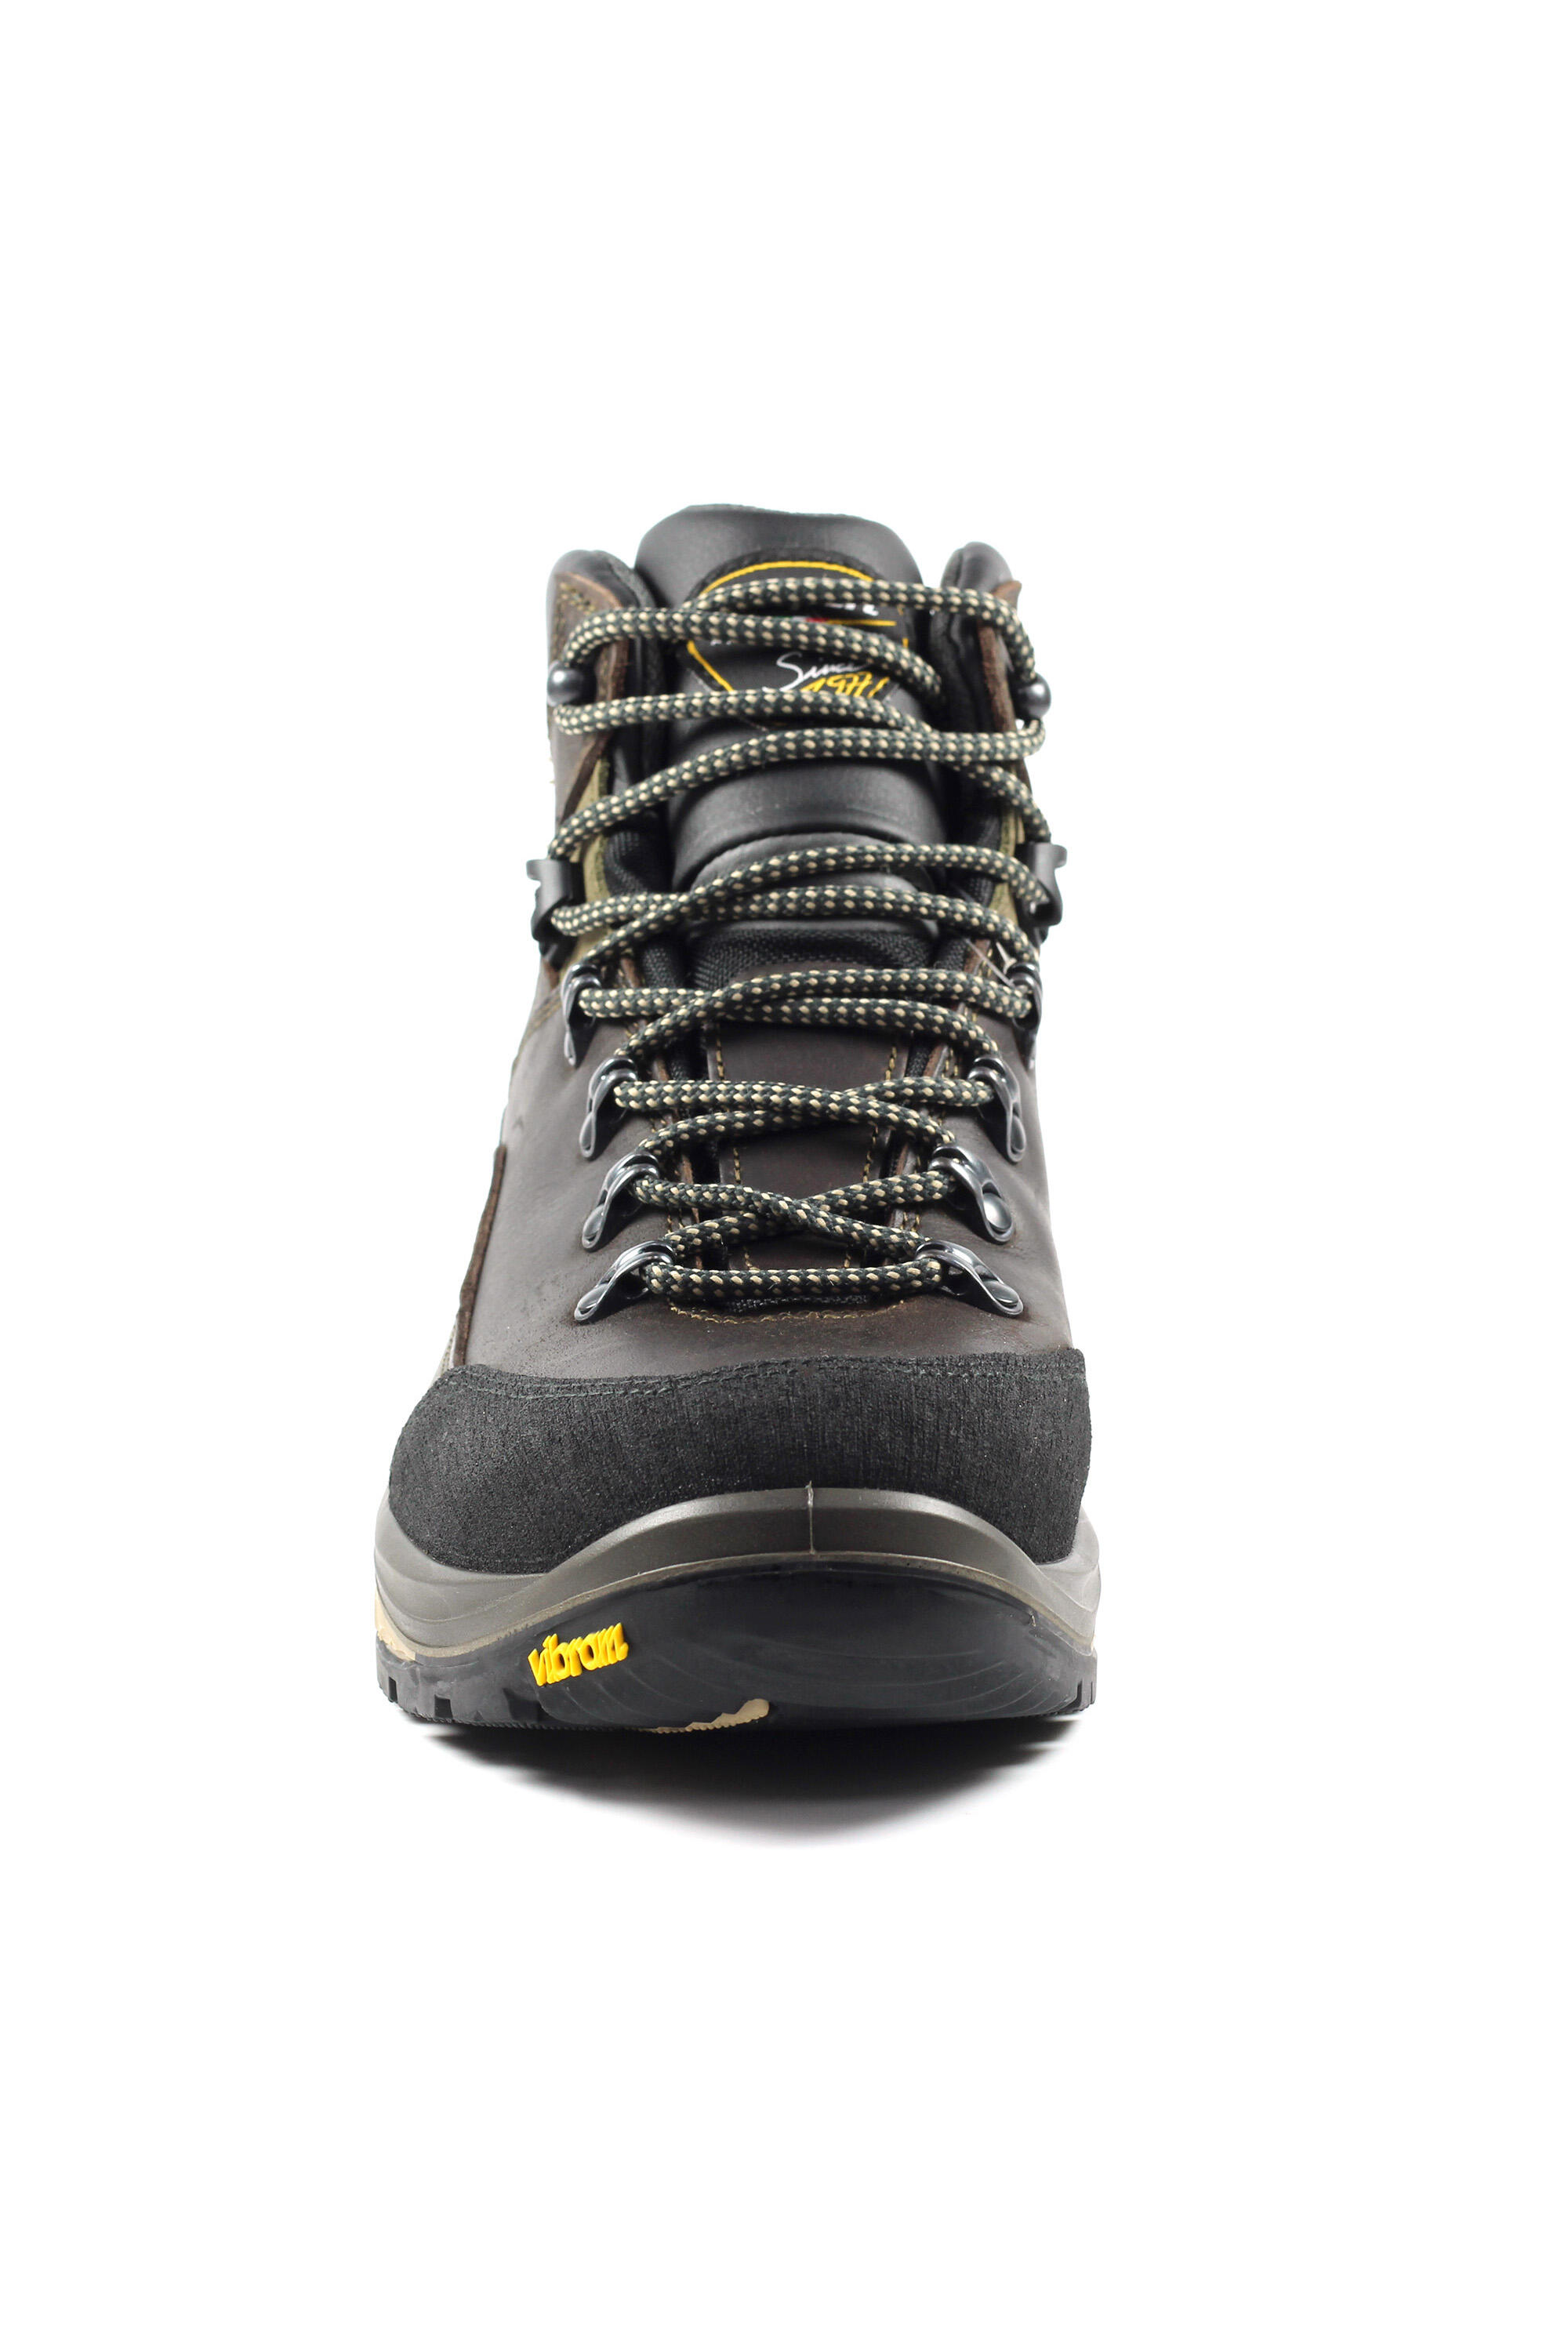 Fortress Brown Waterproof Hiking Boot 4/5